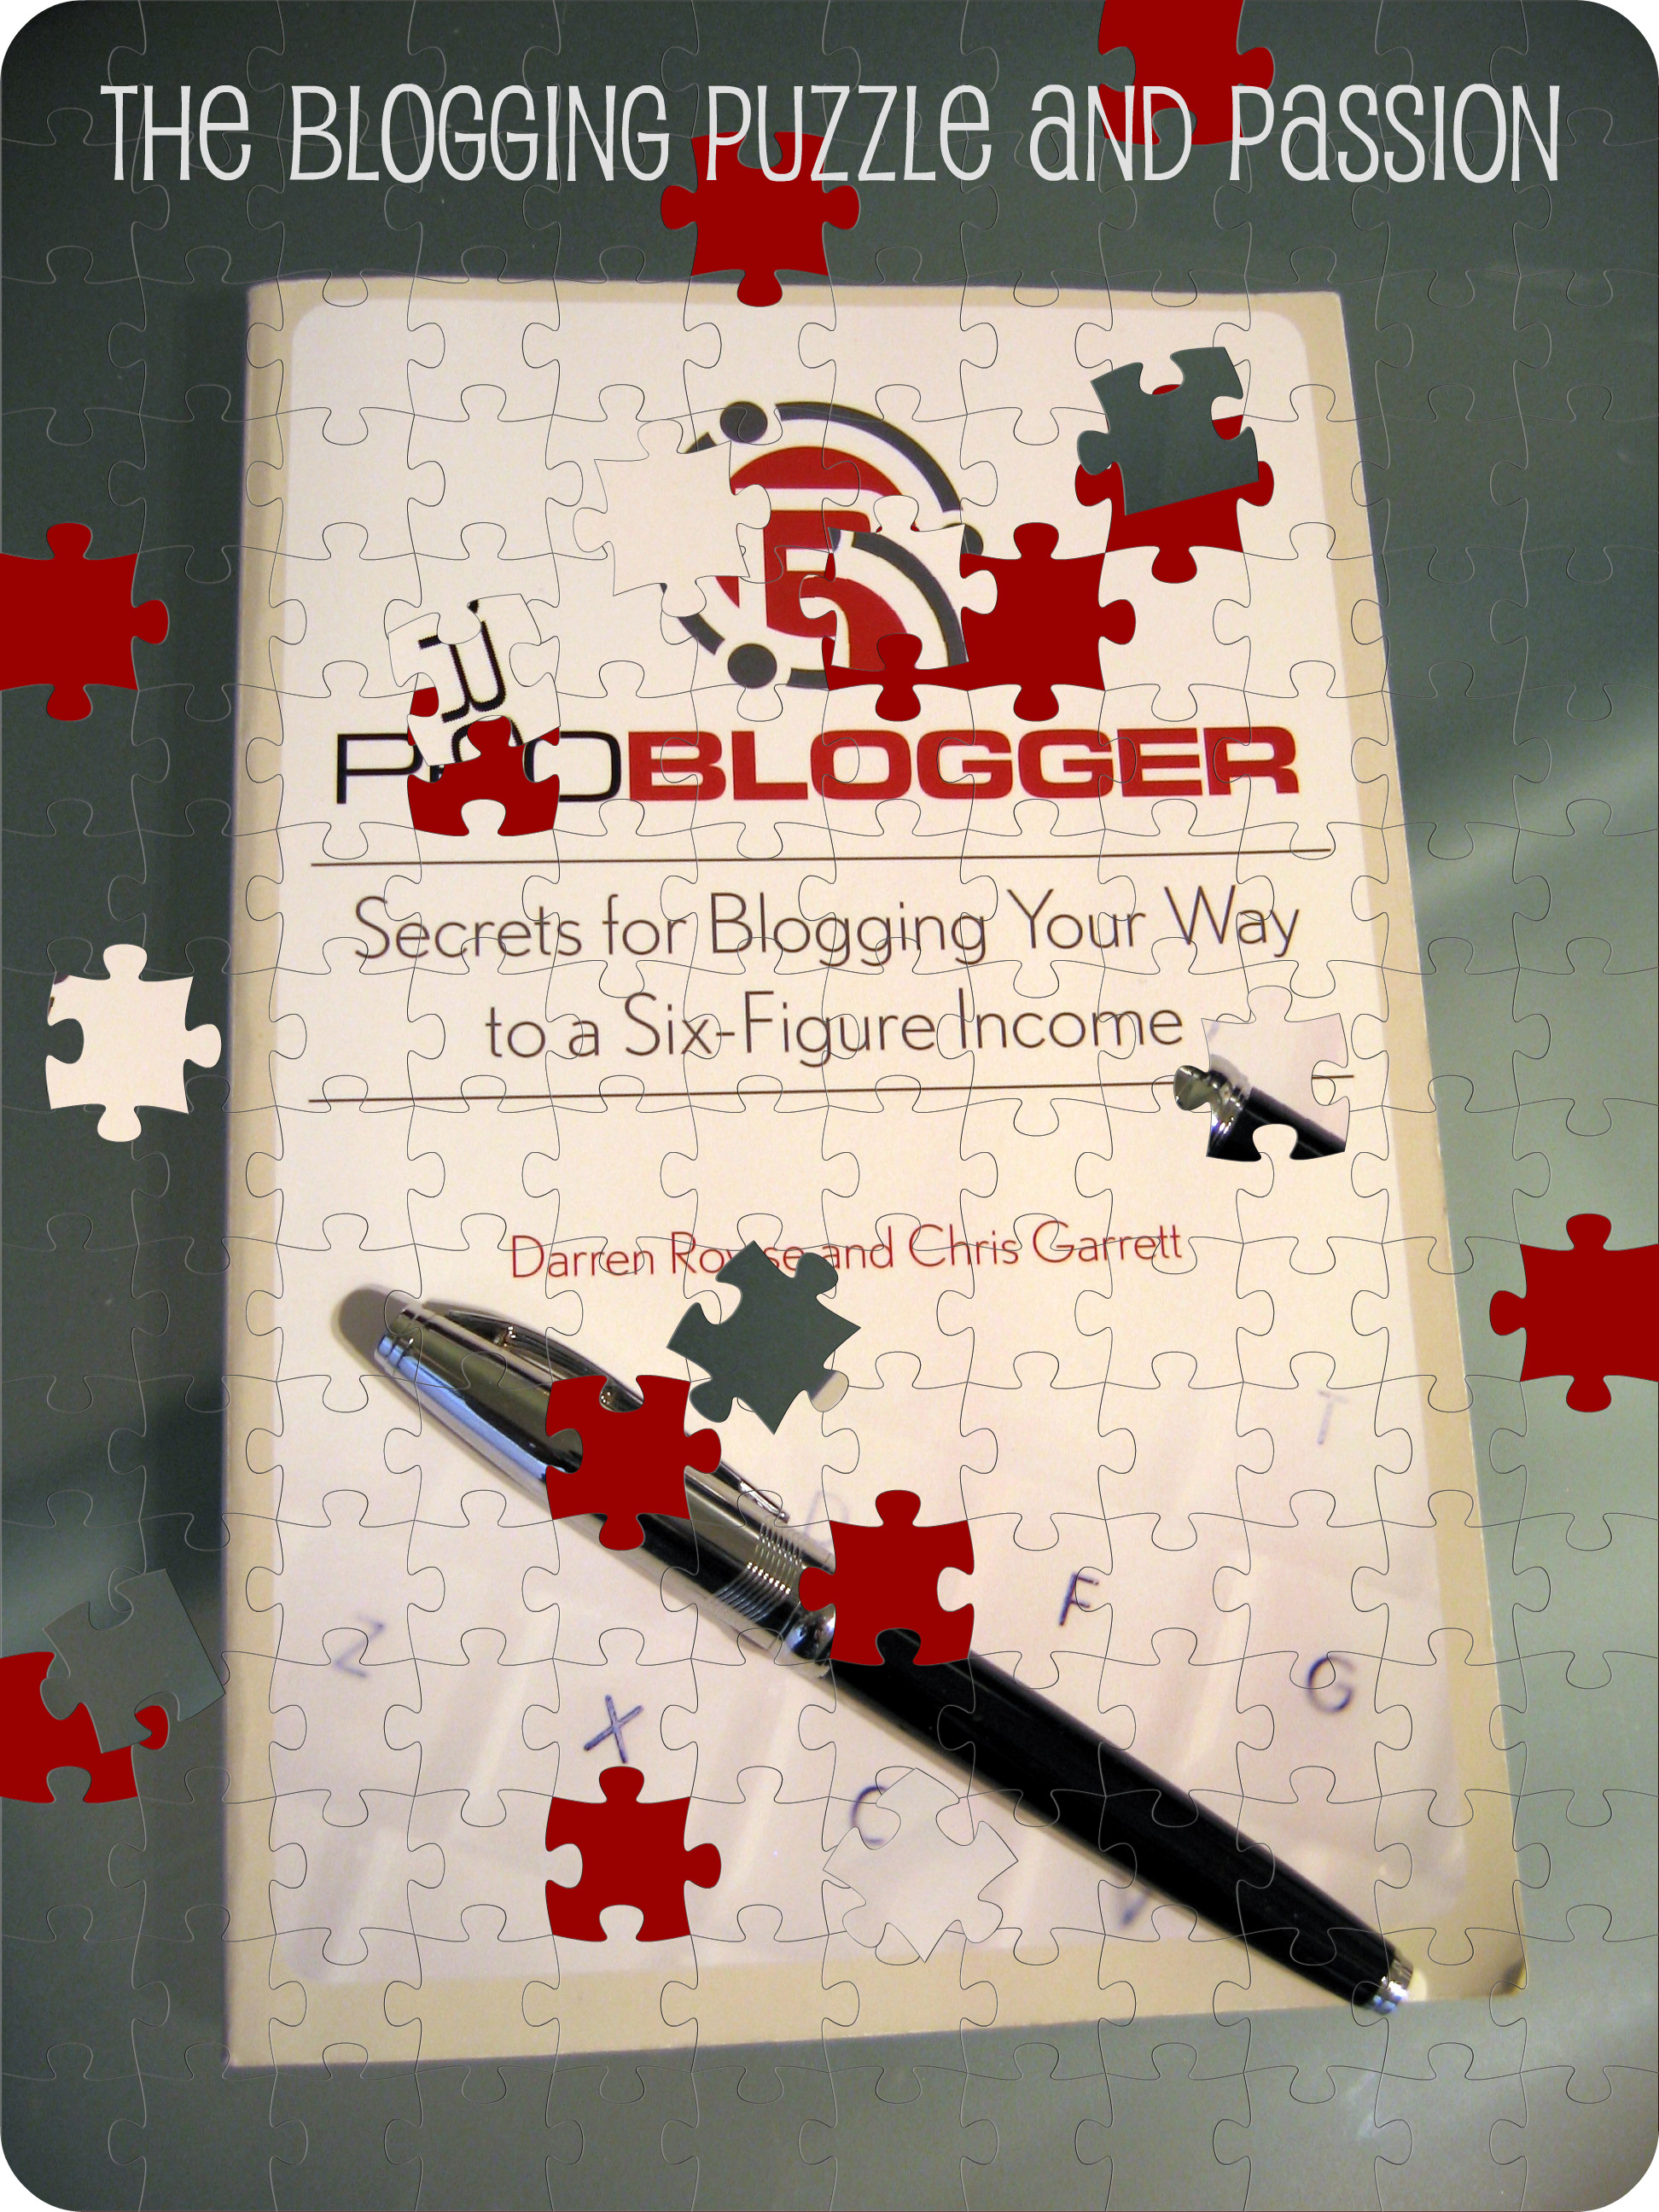 Problogger Book in Puzzle Form by Darren Rowse